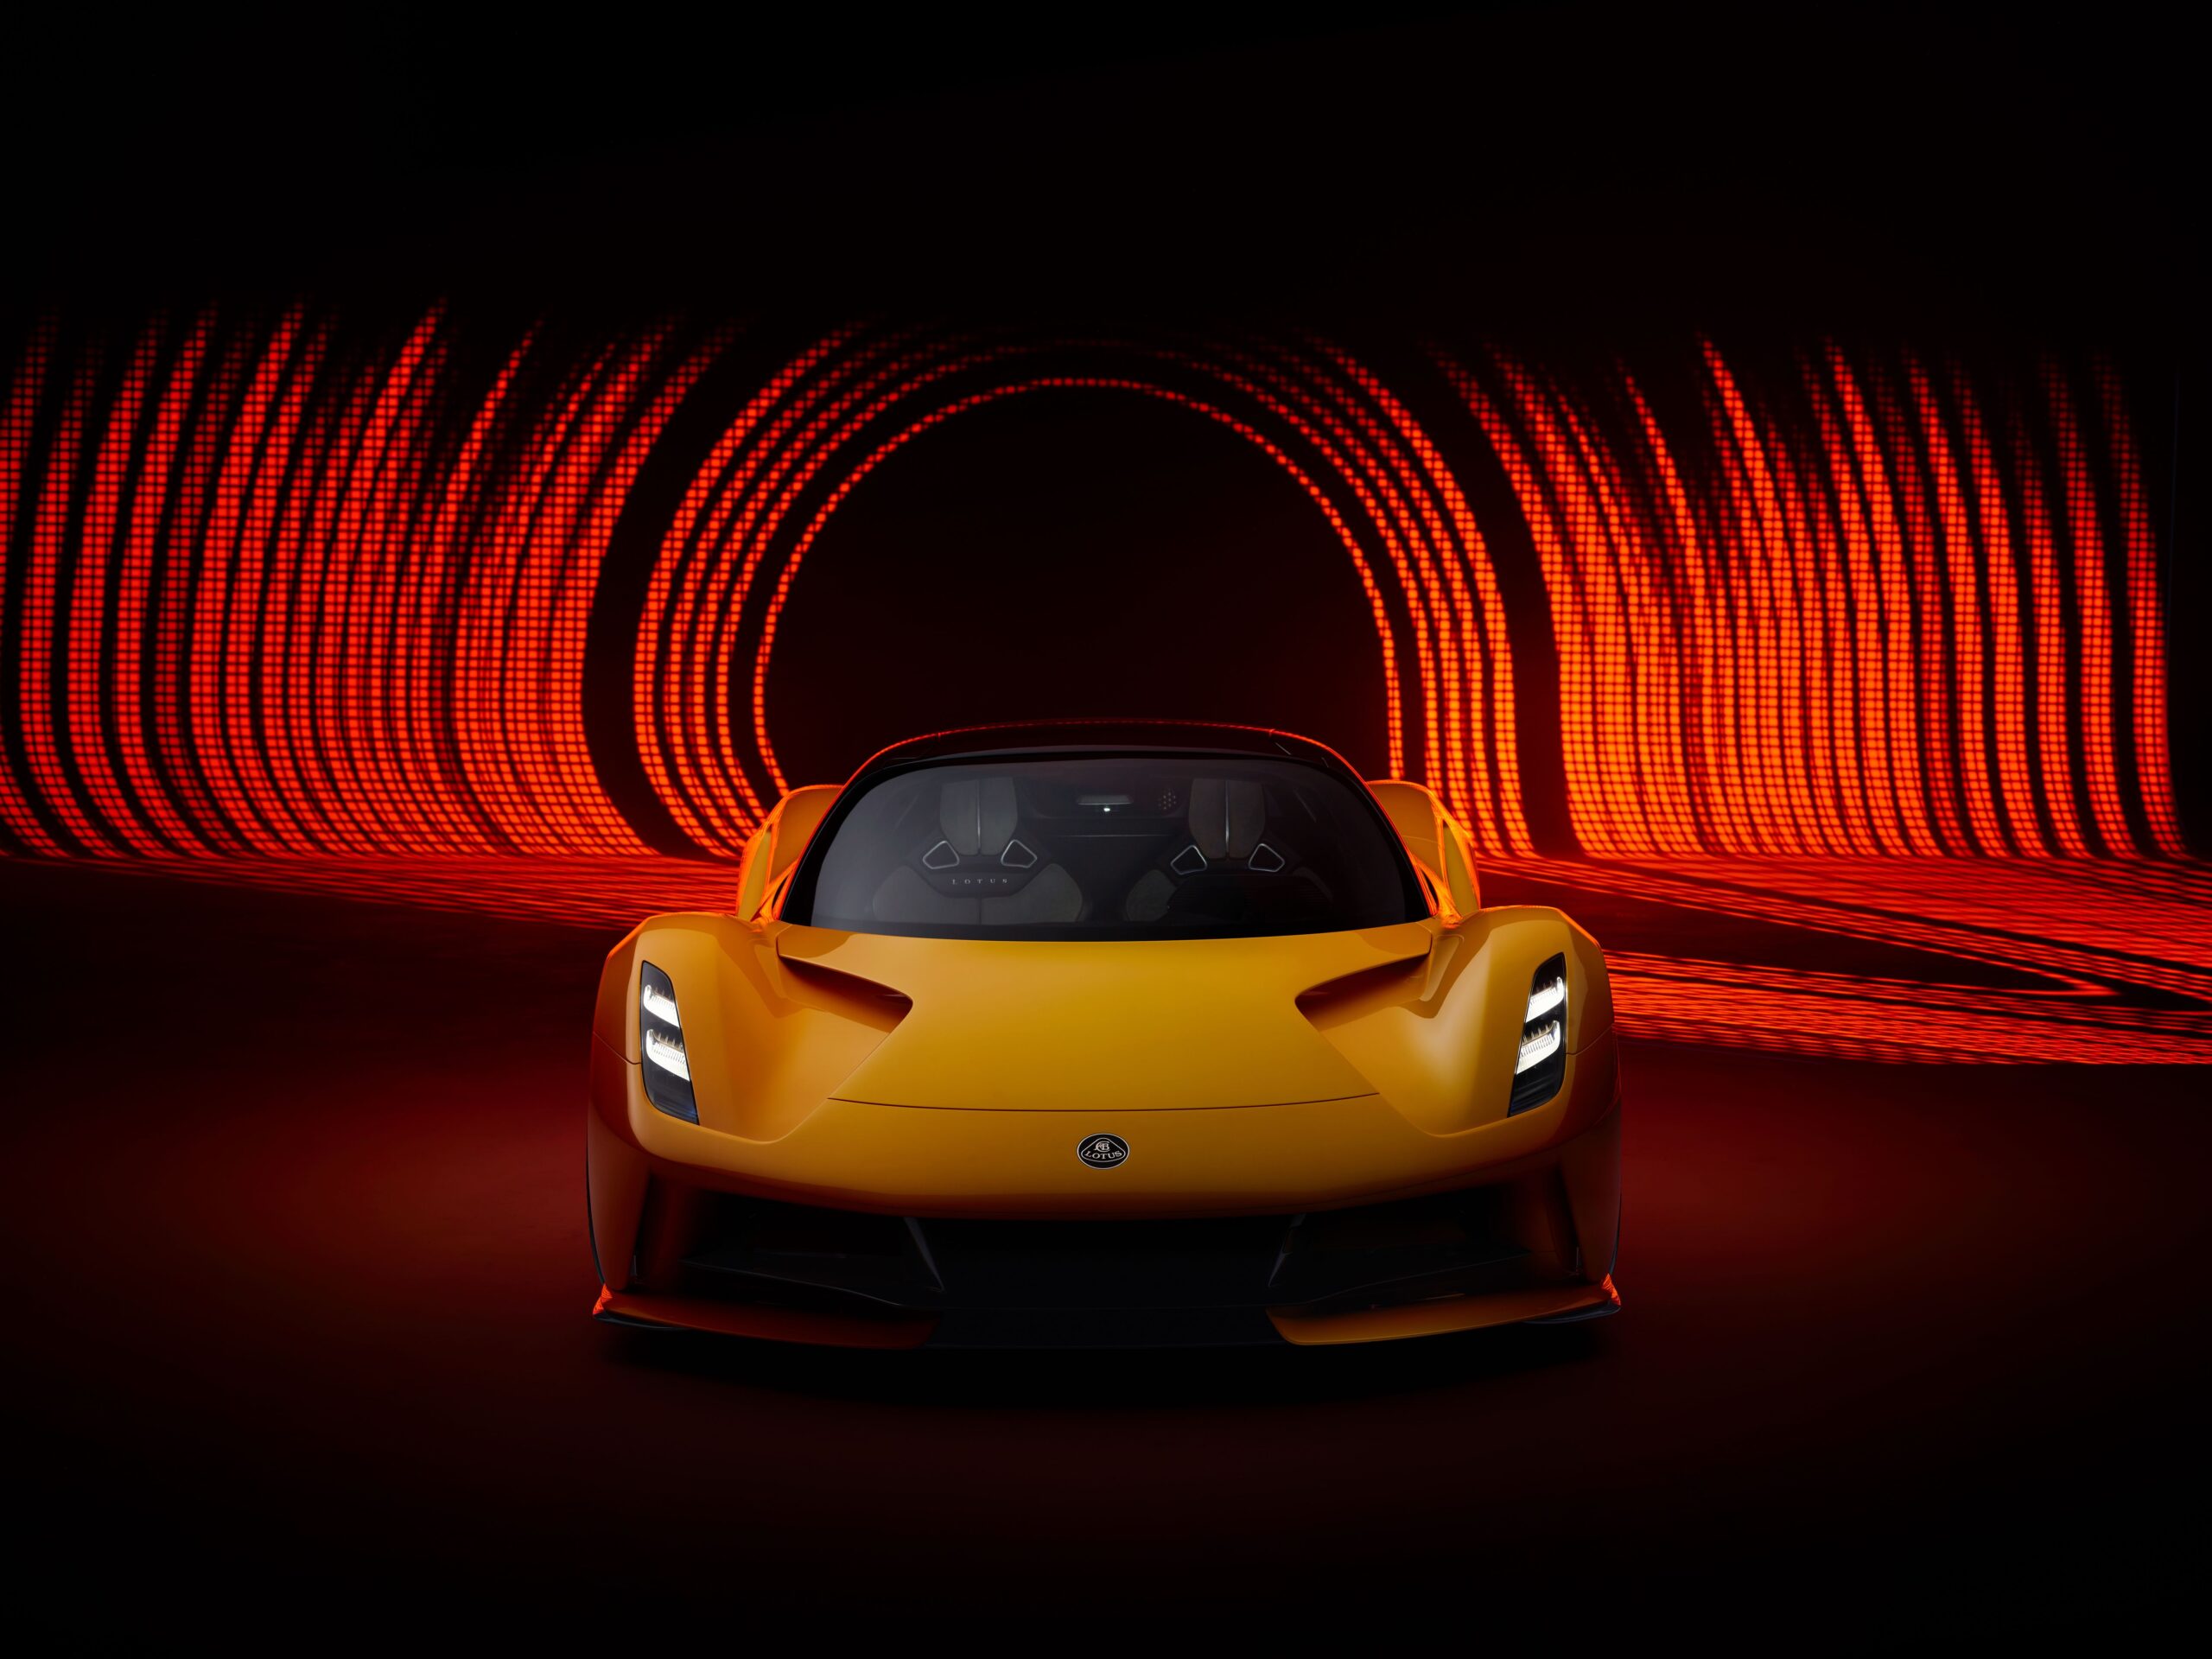 To create the sound for its upcoming Evija hypercar, Lotus turned to British music producer Patrick Patrikios who has worked with pop superstars and created Hollywood sound tracks